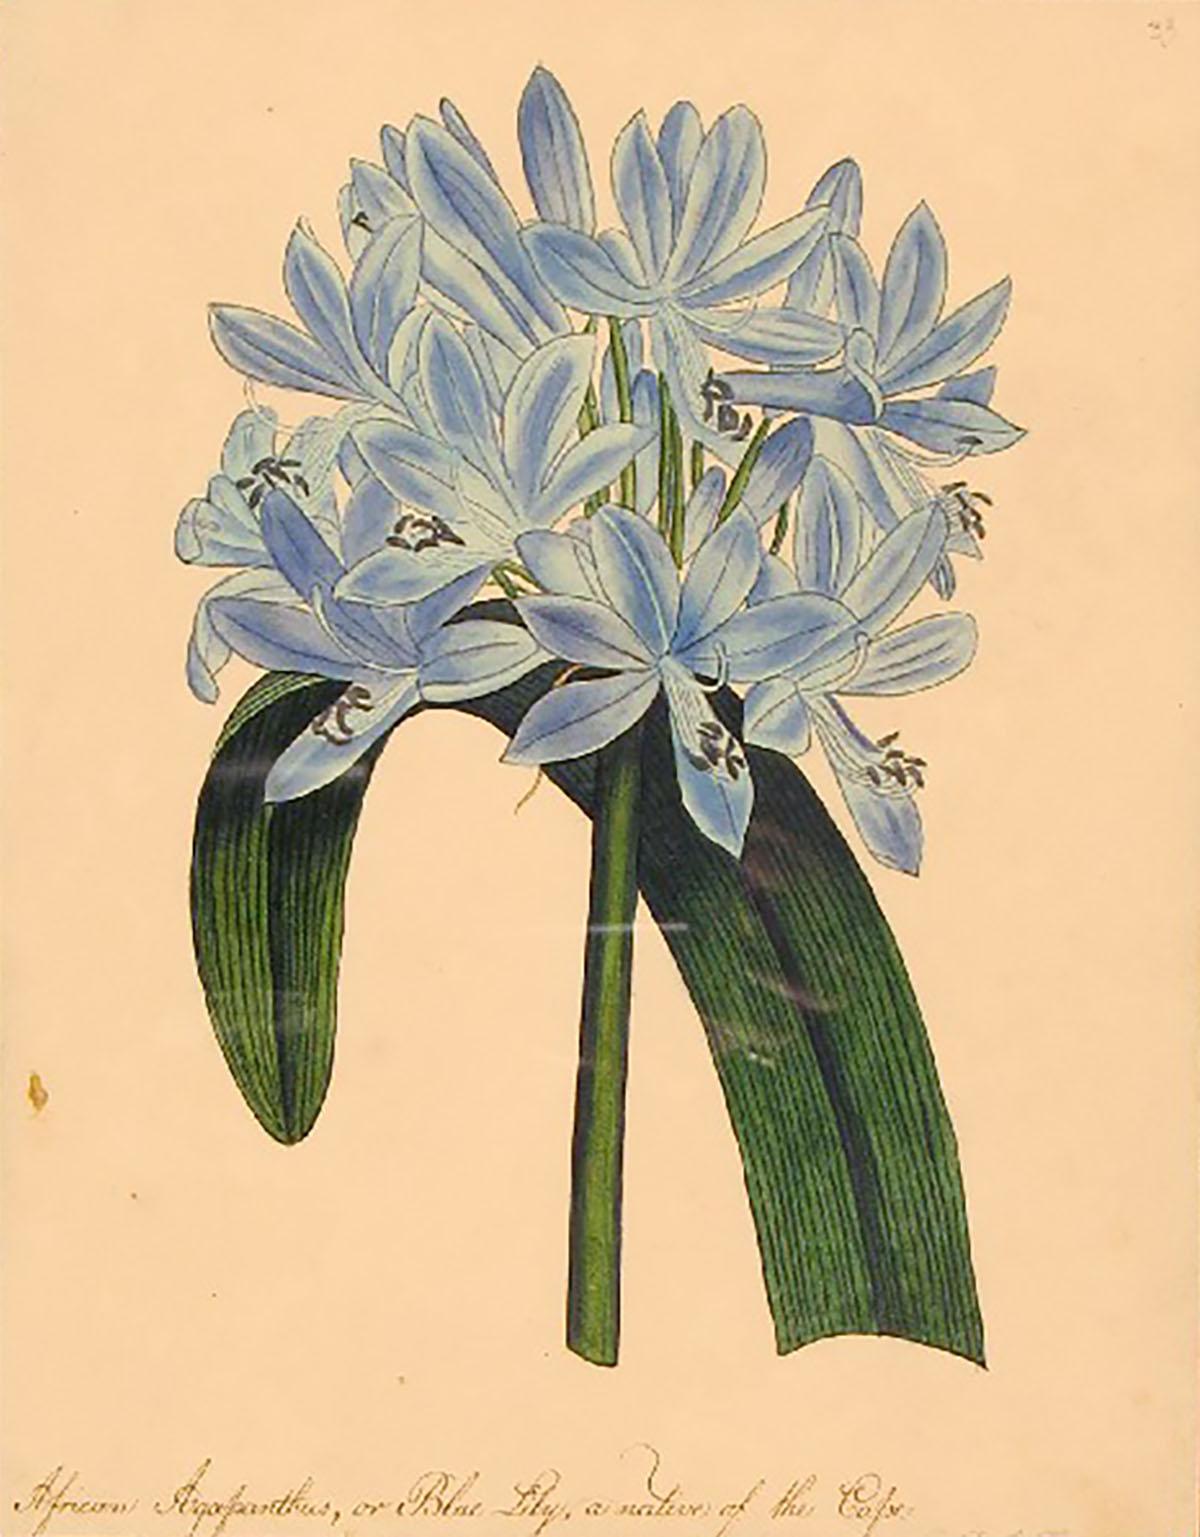 Frances Jauncey Ketchum Still-Life - African Agapanthus, or Blue Lily, a native of the Cape